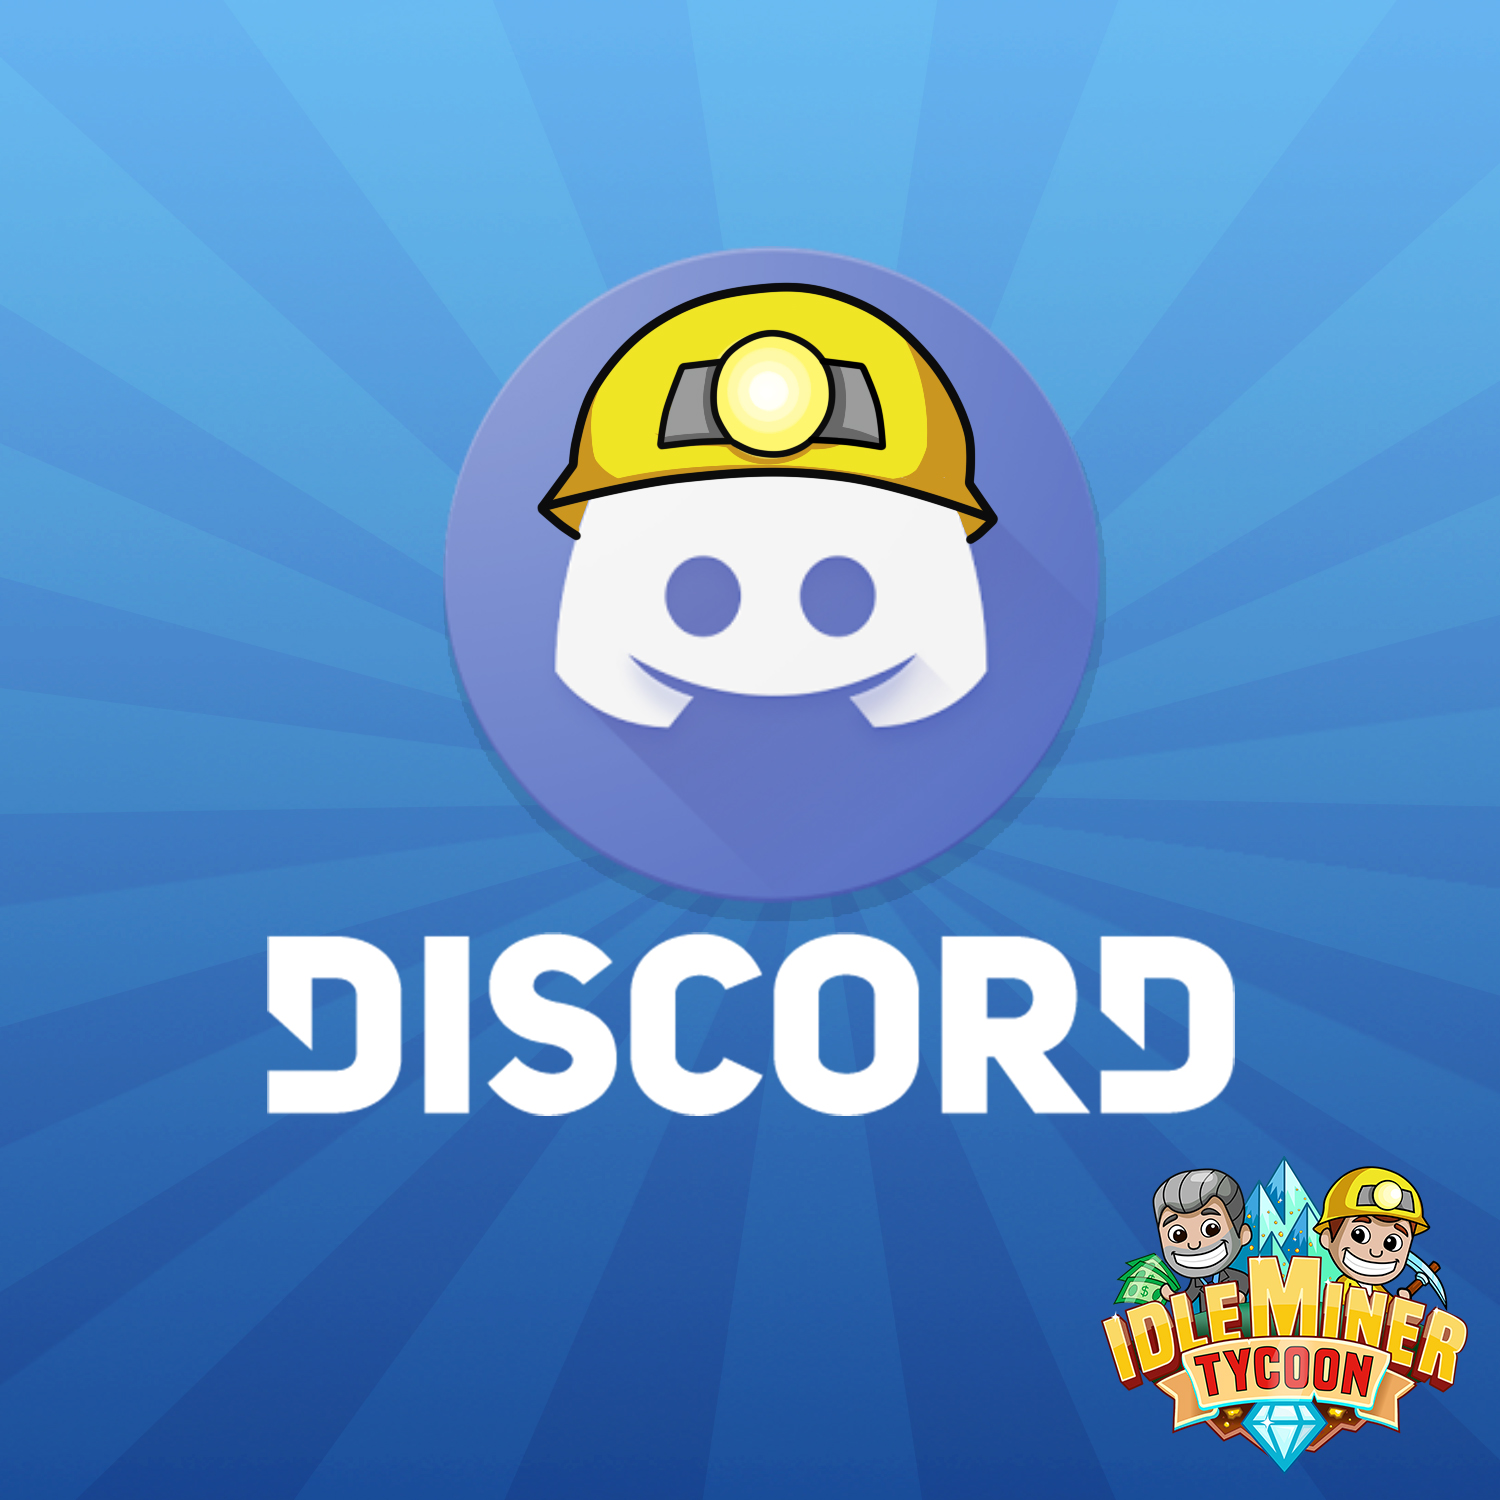 Idleminertycoon Wiki Fandom - roblox tycoon coal miner how to secure load